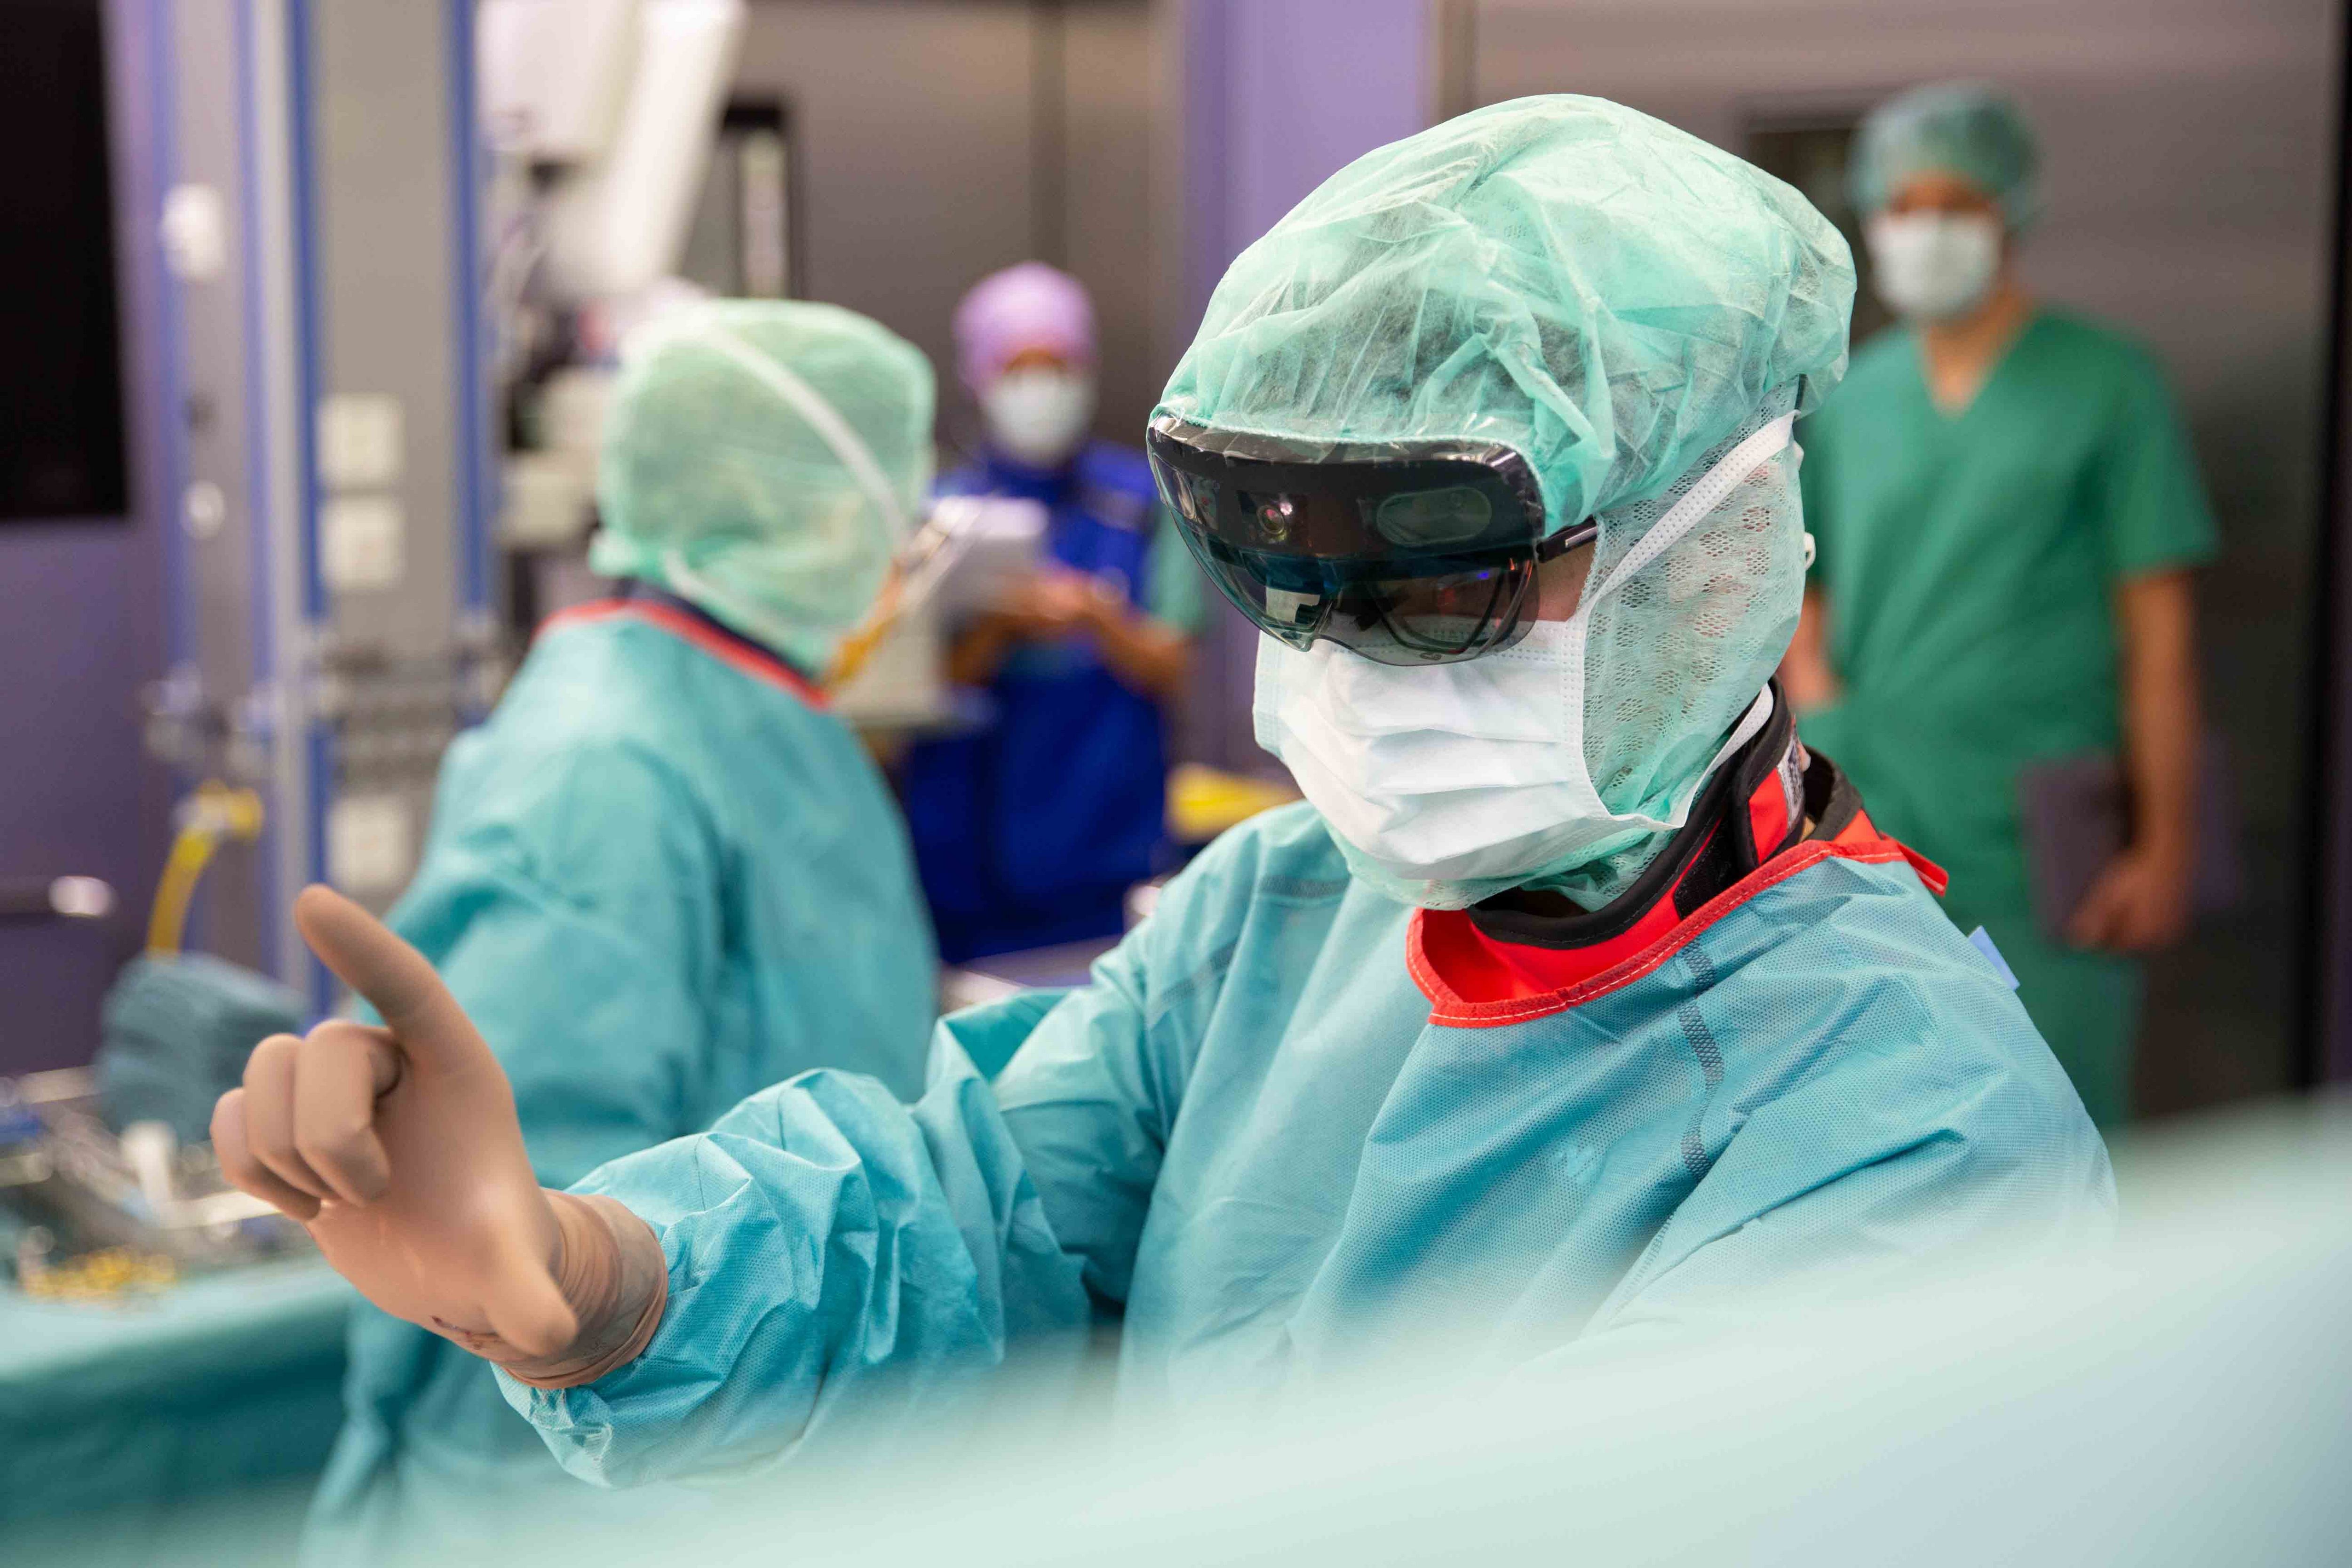 Prof. Farshad in the operating room wearing AR glasses.